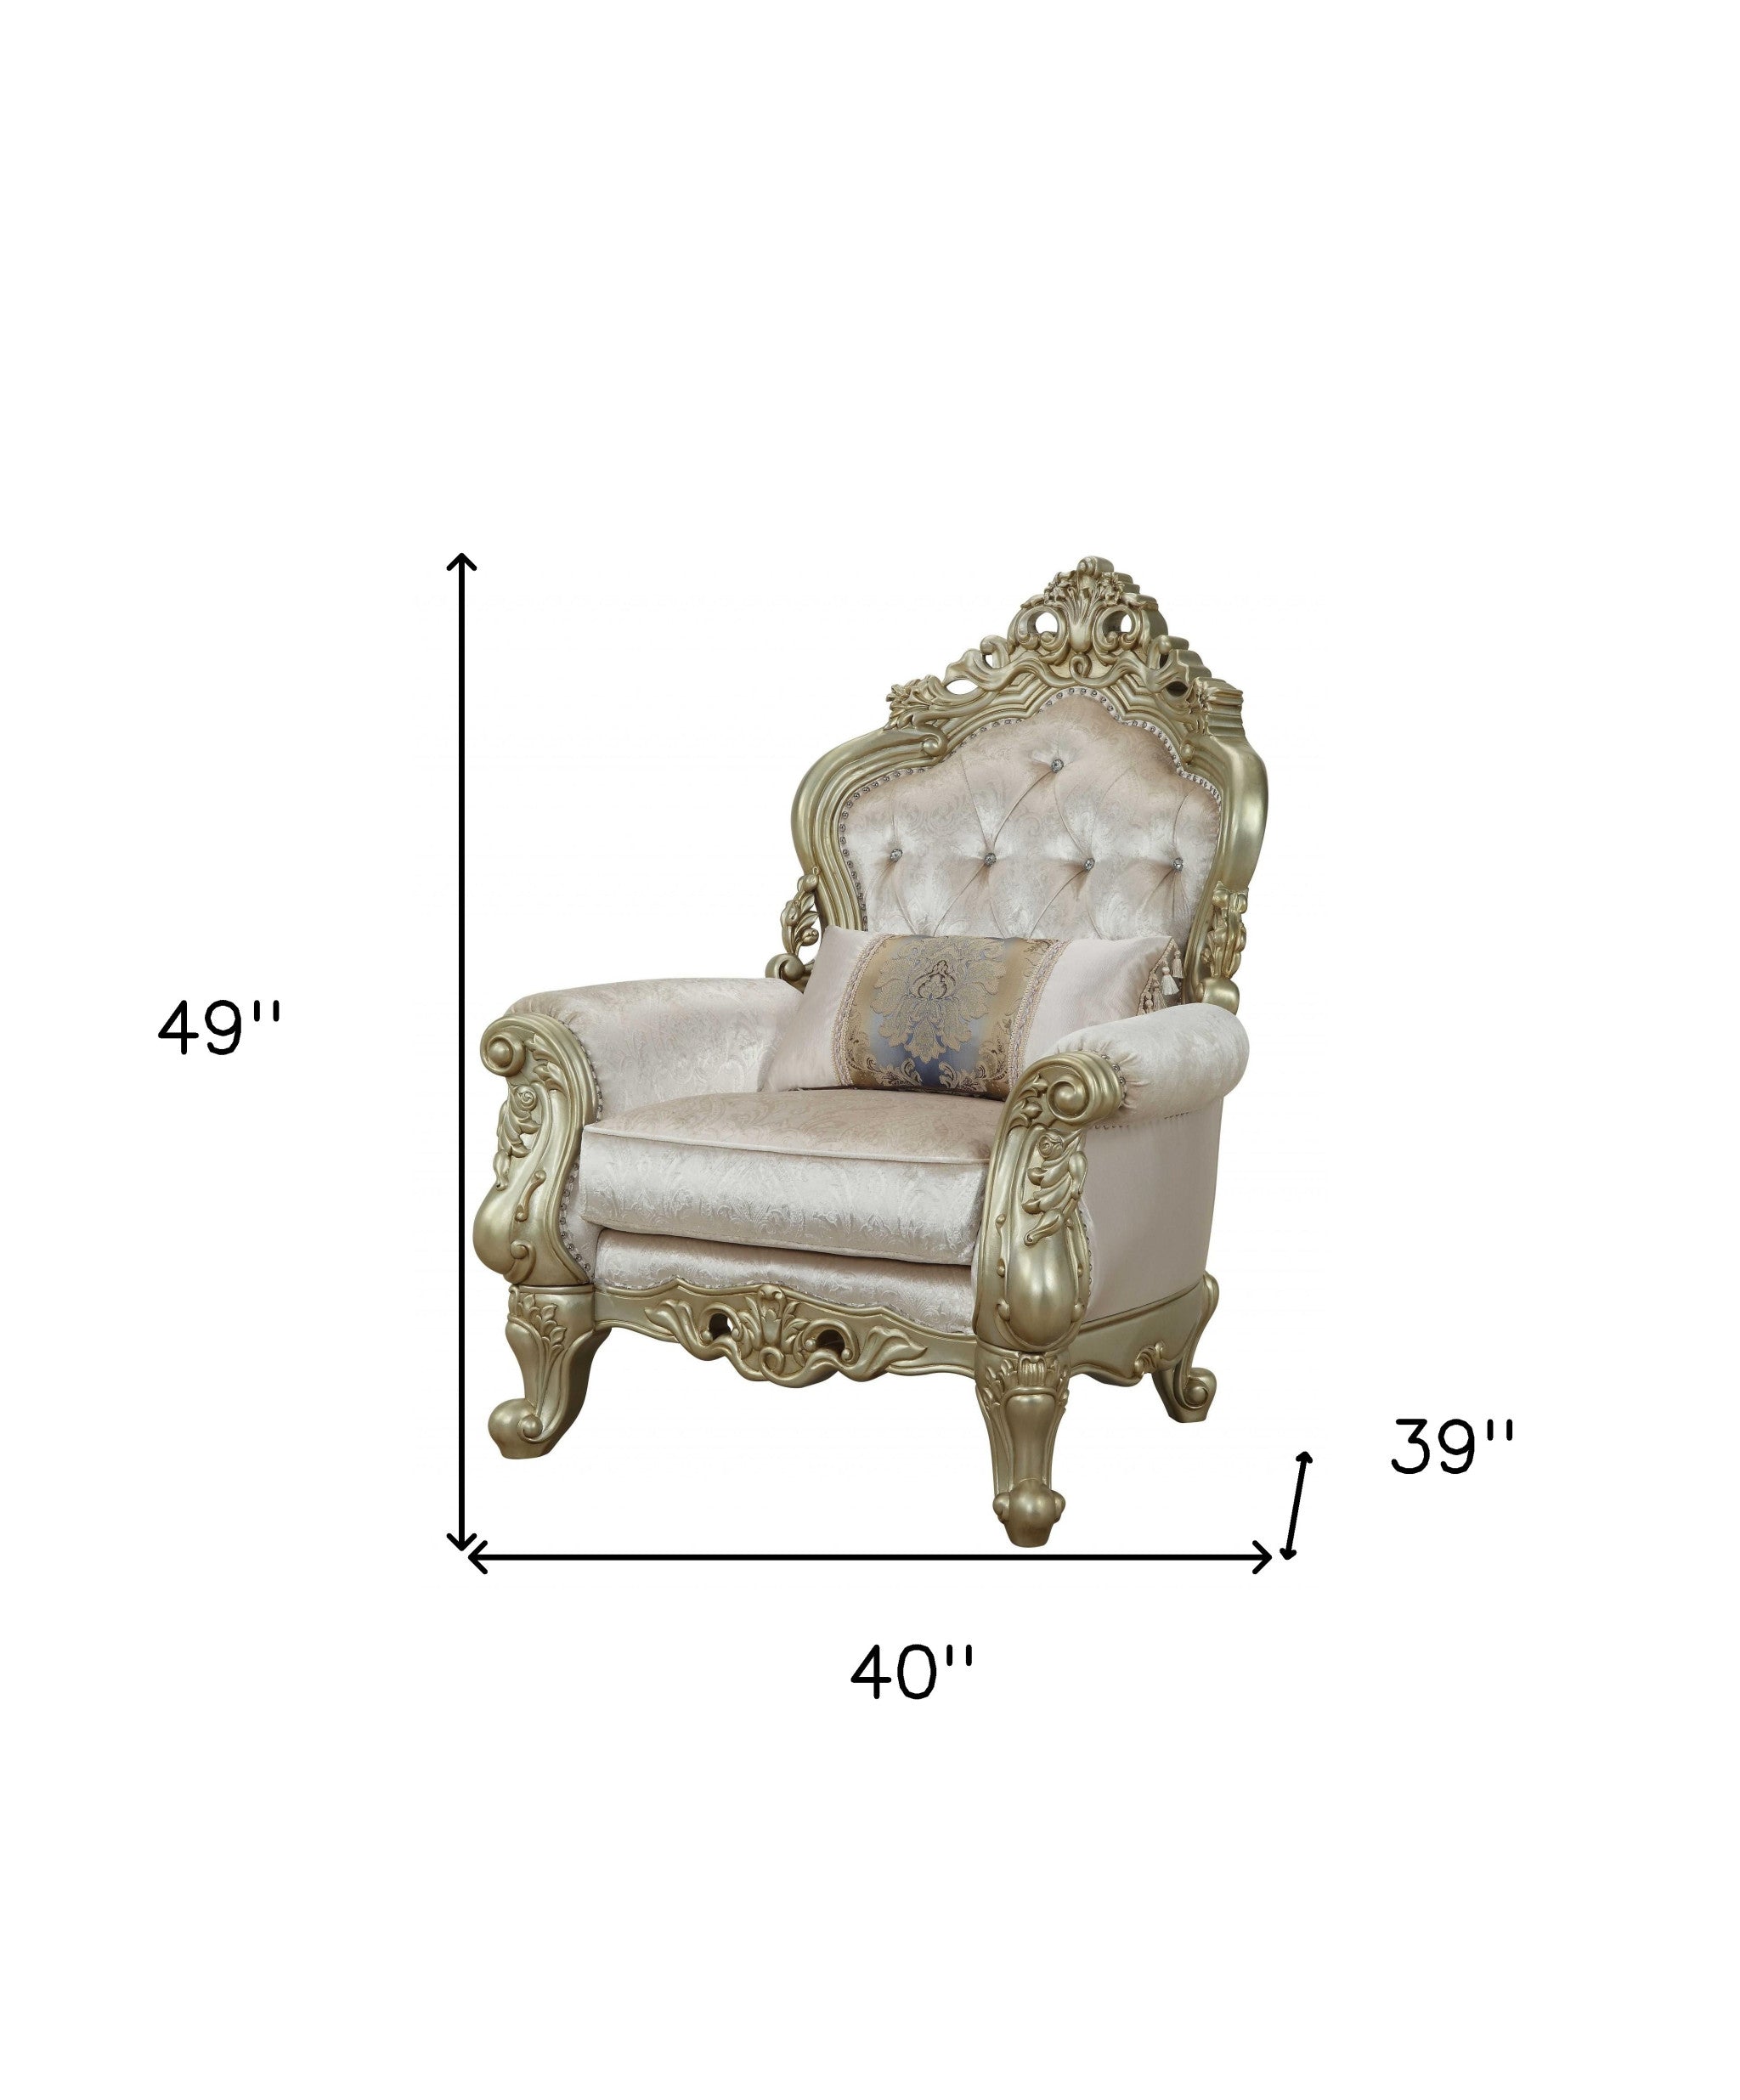 40" White And Pearl Fabric Damask Tufted Chesterfield Chair